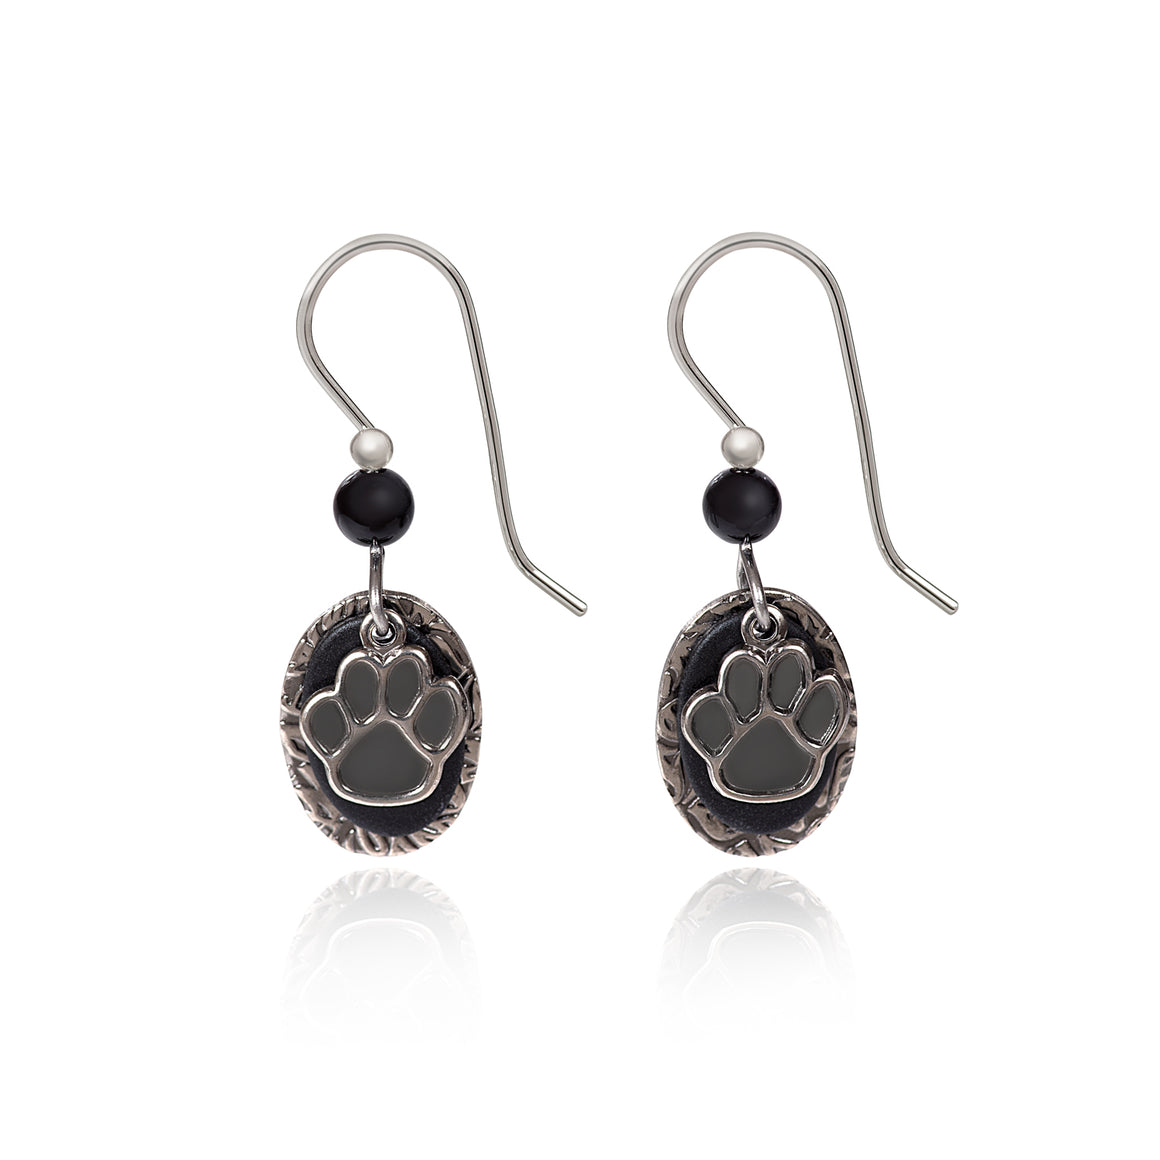 SILVER PAW PRINT ON OVALS- SILVER FOREST EARRINGS